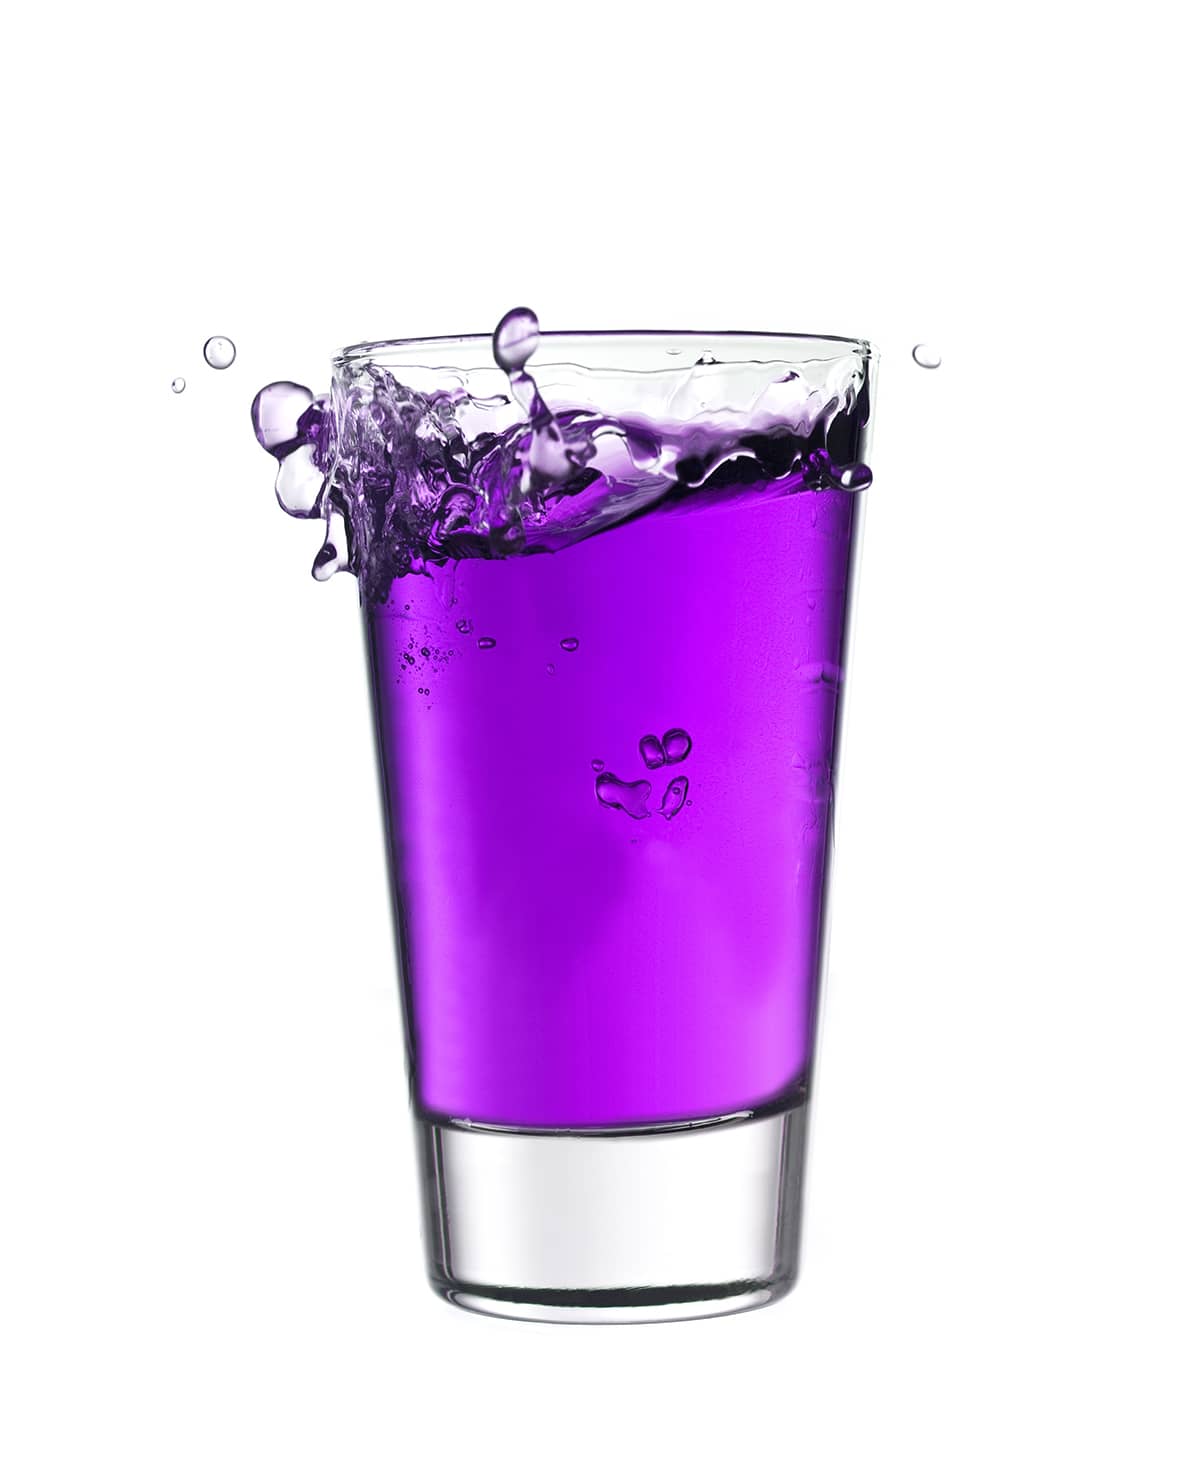 Glass of purple liquid brings up the question what is purple drank